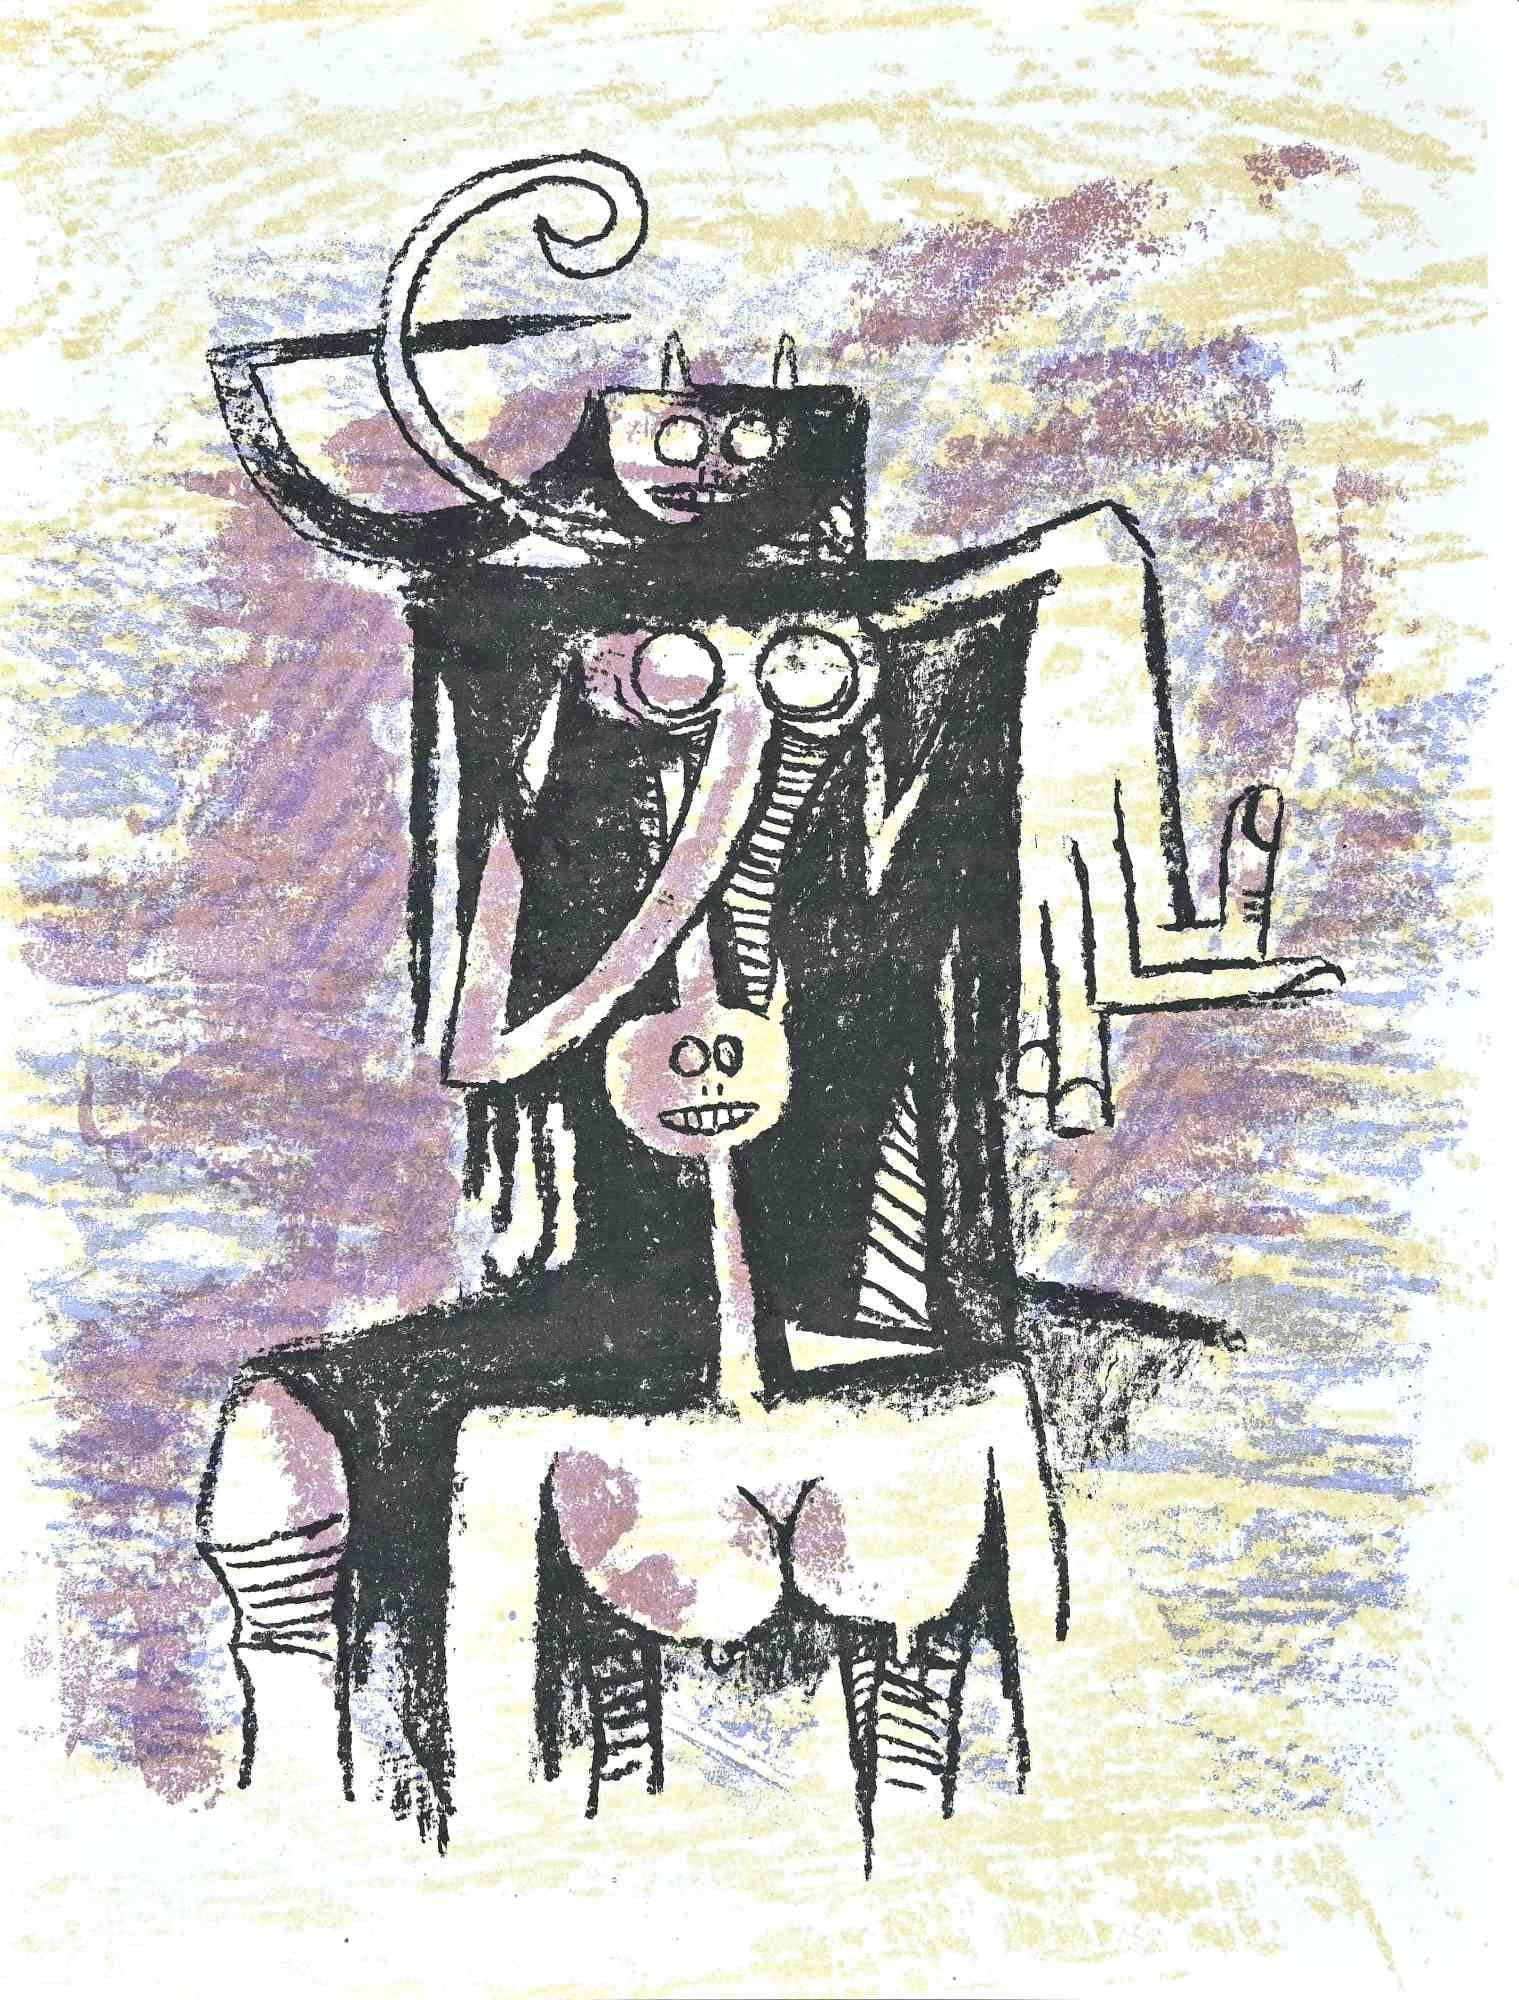 Untitled is a lithograph realized y the  Cuban artist Wifredo Lam (Sagua la Grande, 1902 - Paris, 1982). 

This color lithograph on wove paper, was edited by the French magazine "XXe Siécle", and published on the Panorama 74 - Le Surréalisme II,